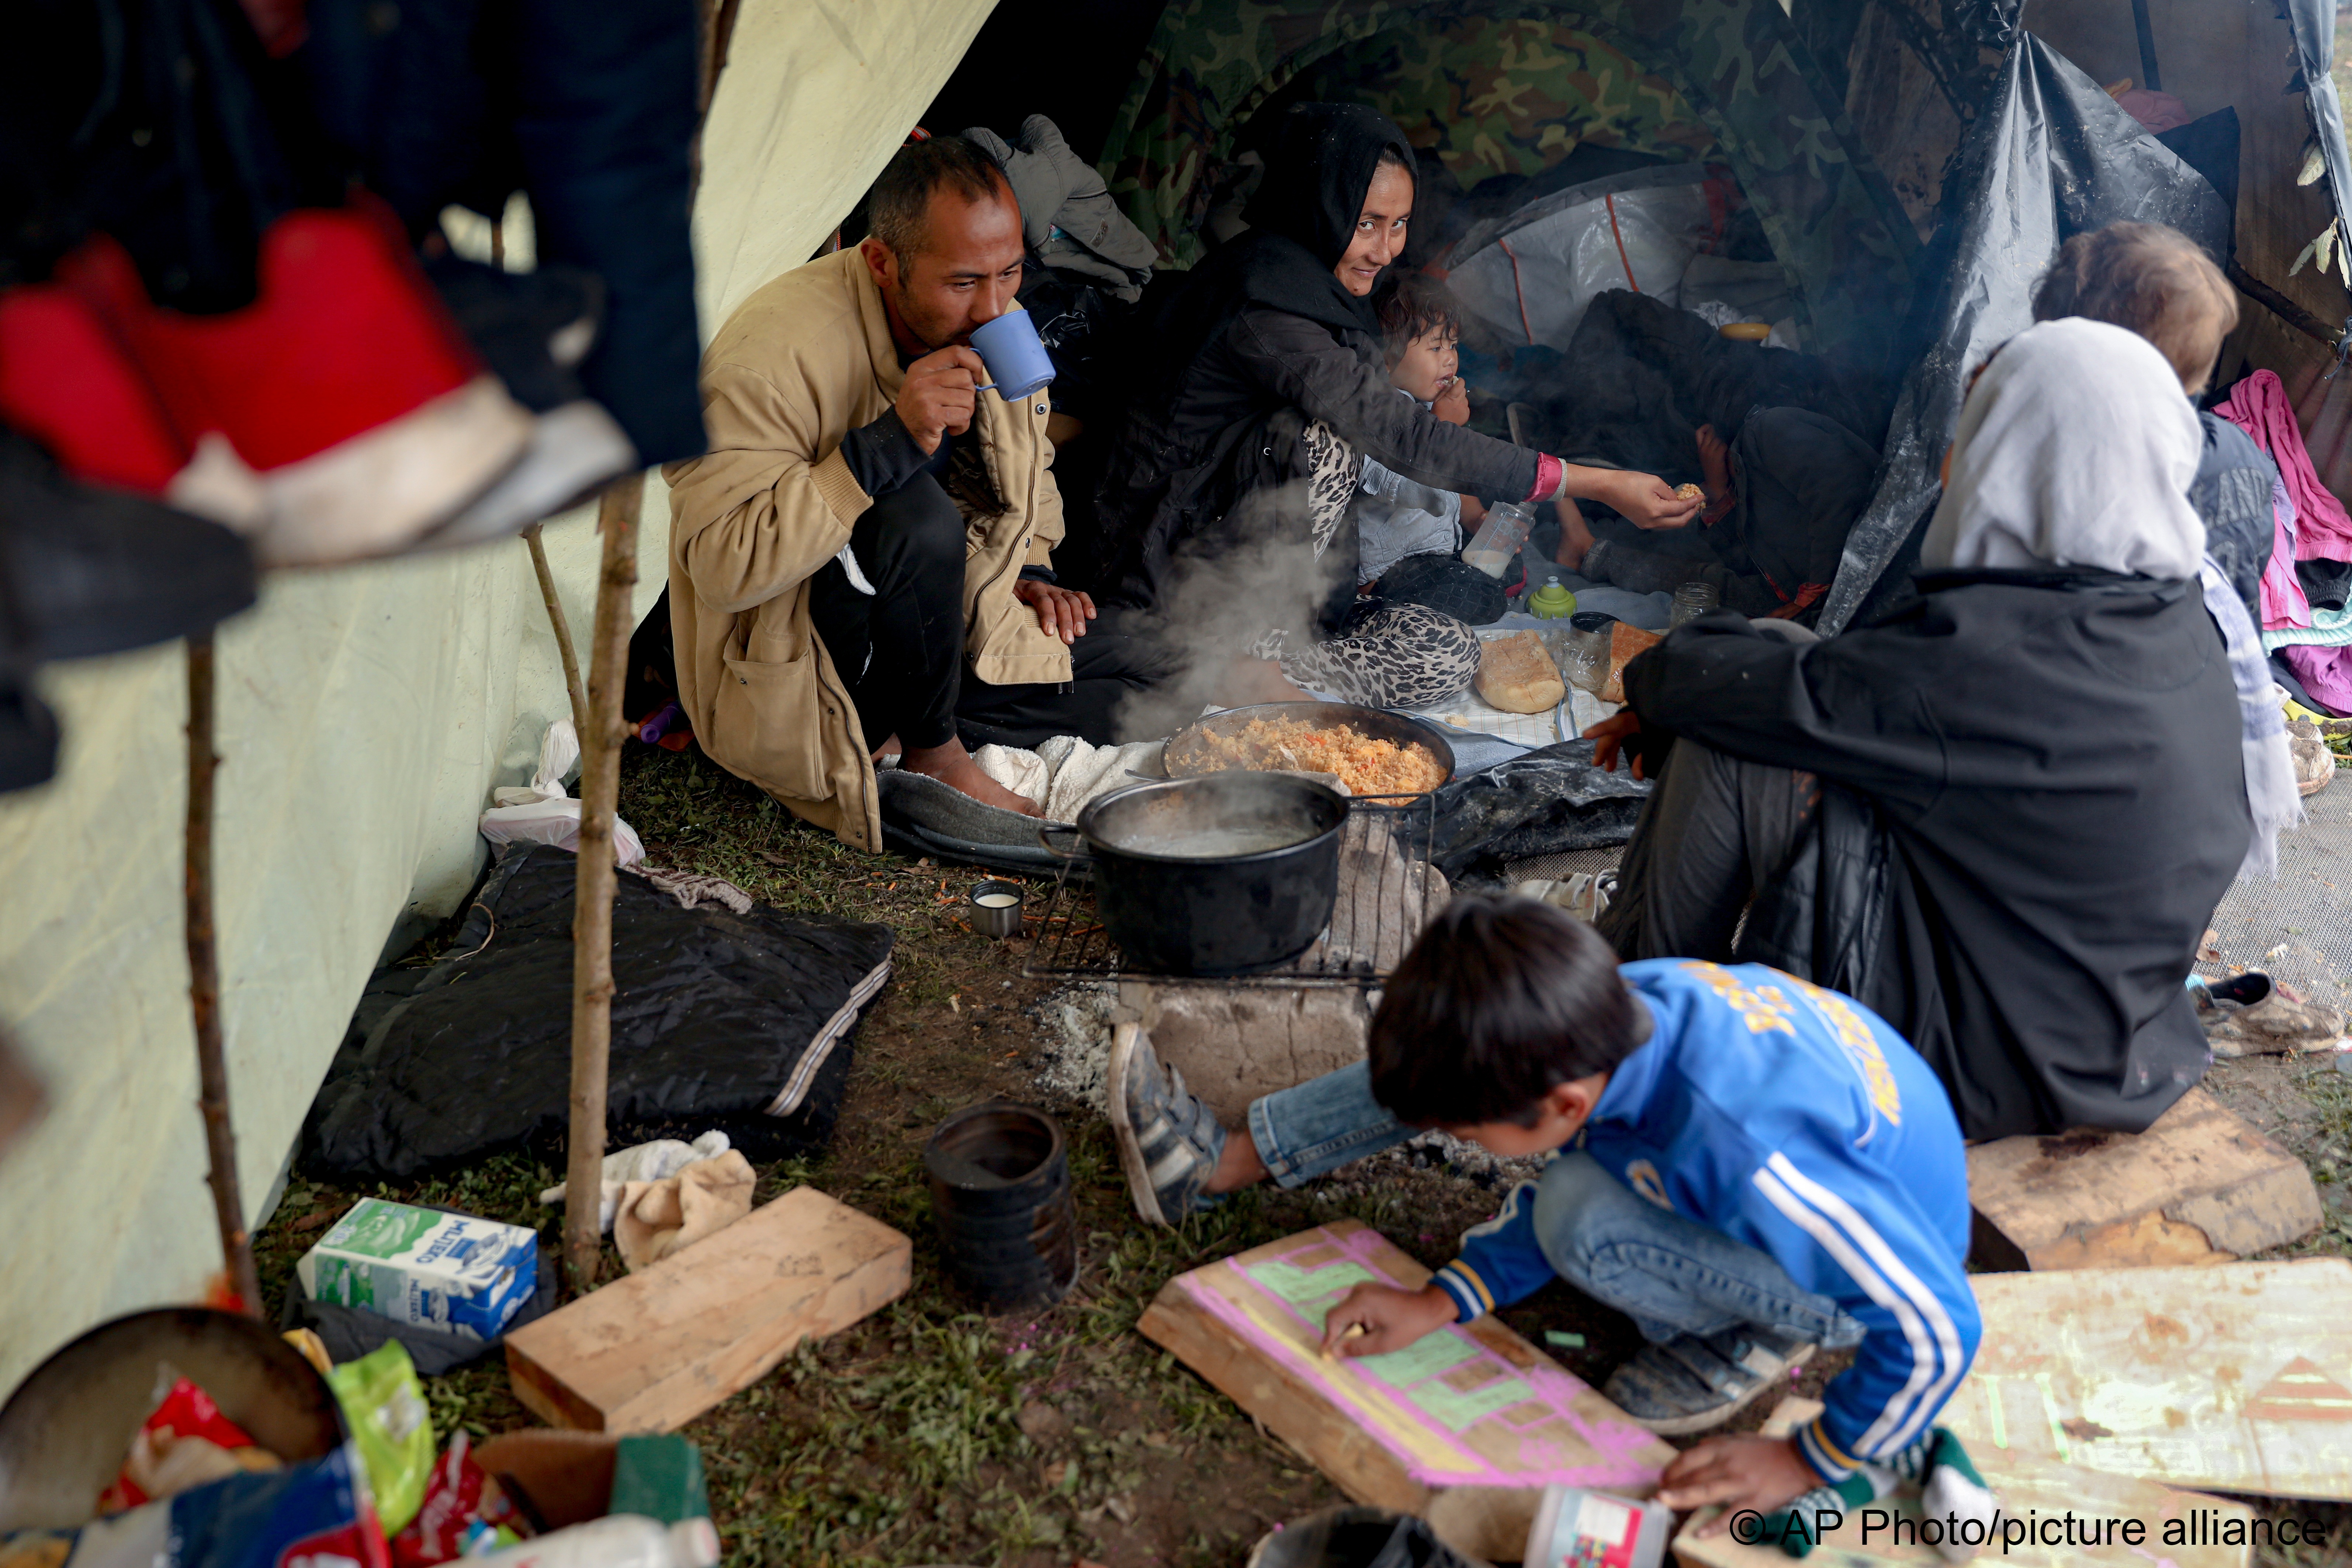 A migrant child draws on a piece of wood as people eat at a makeshift camp housing migrants mostly from Afghanistan, in Velika Kladusa, Bosnia, 12 October 2021 (photo: AP Photo)